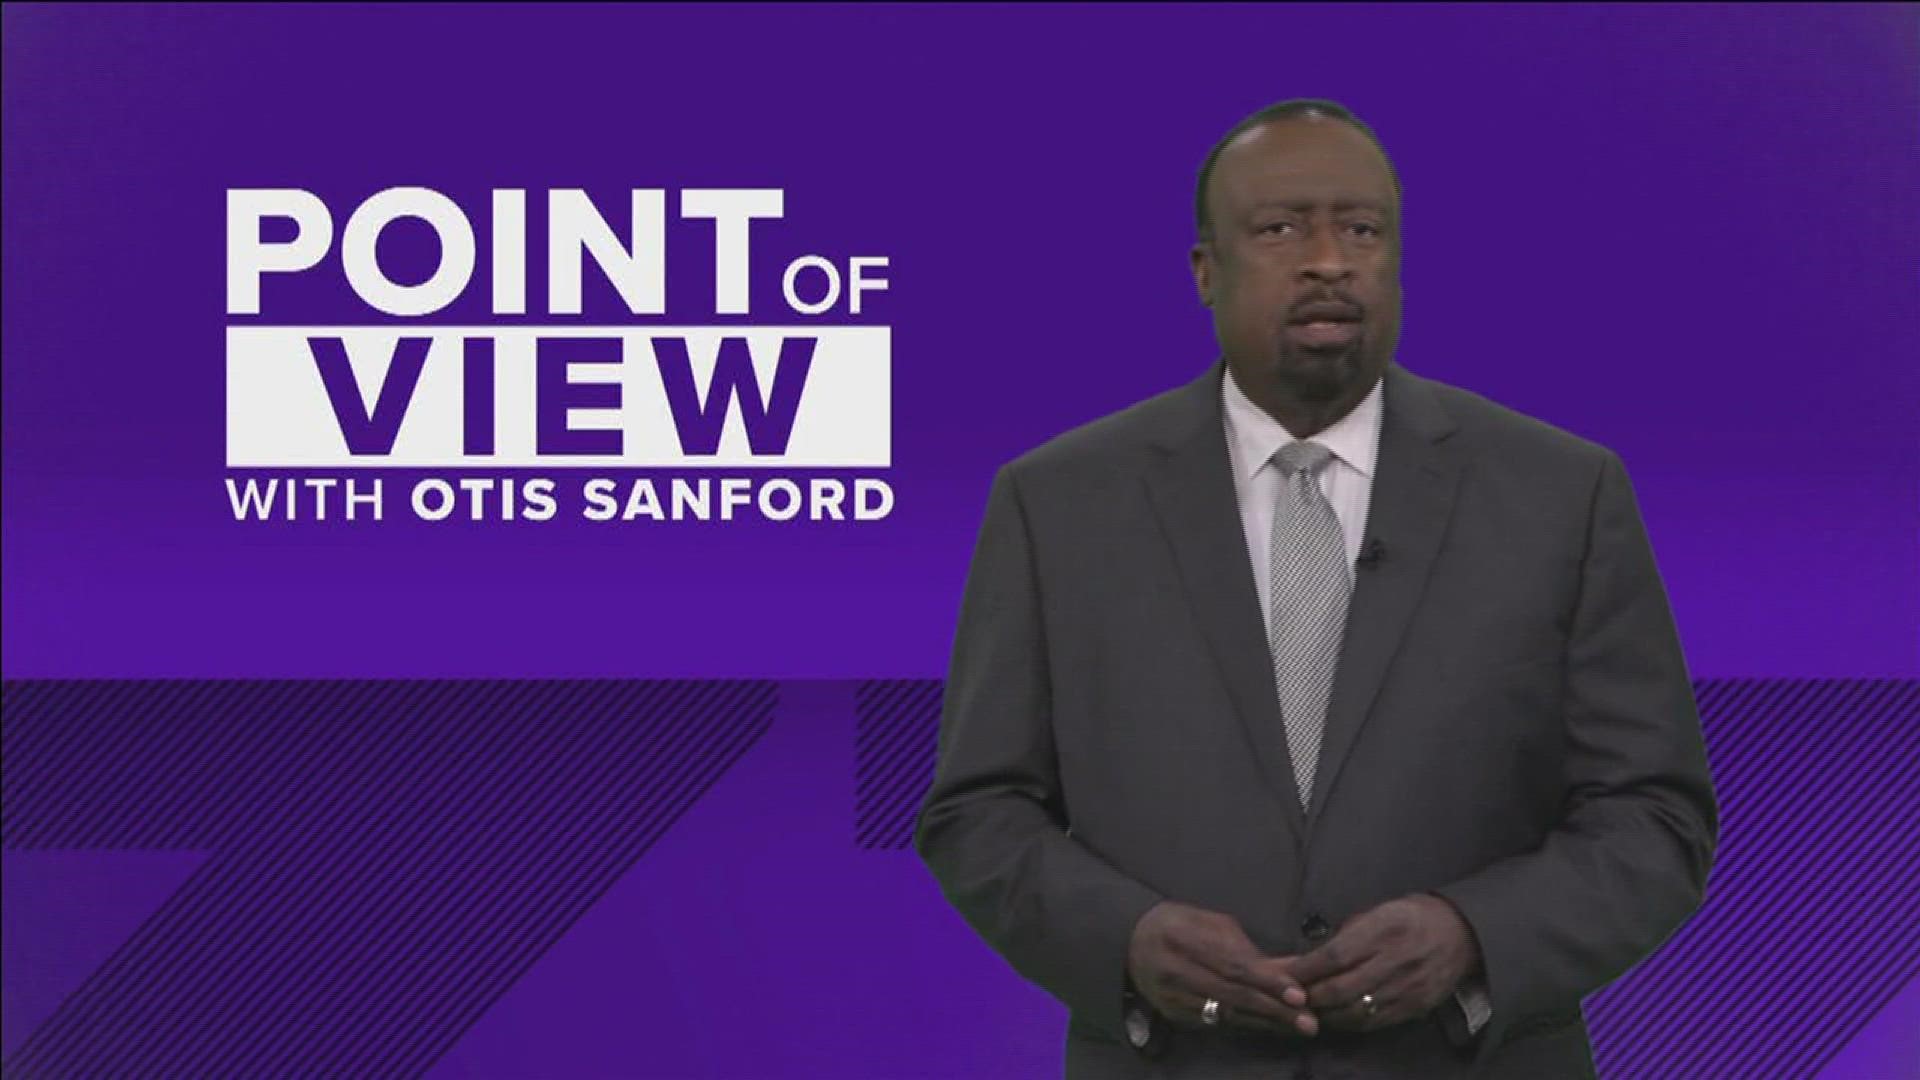 Otis Sanford gives his point of view on the latest developments with the '3G' schools in Germantown.